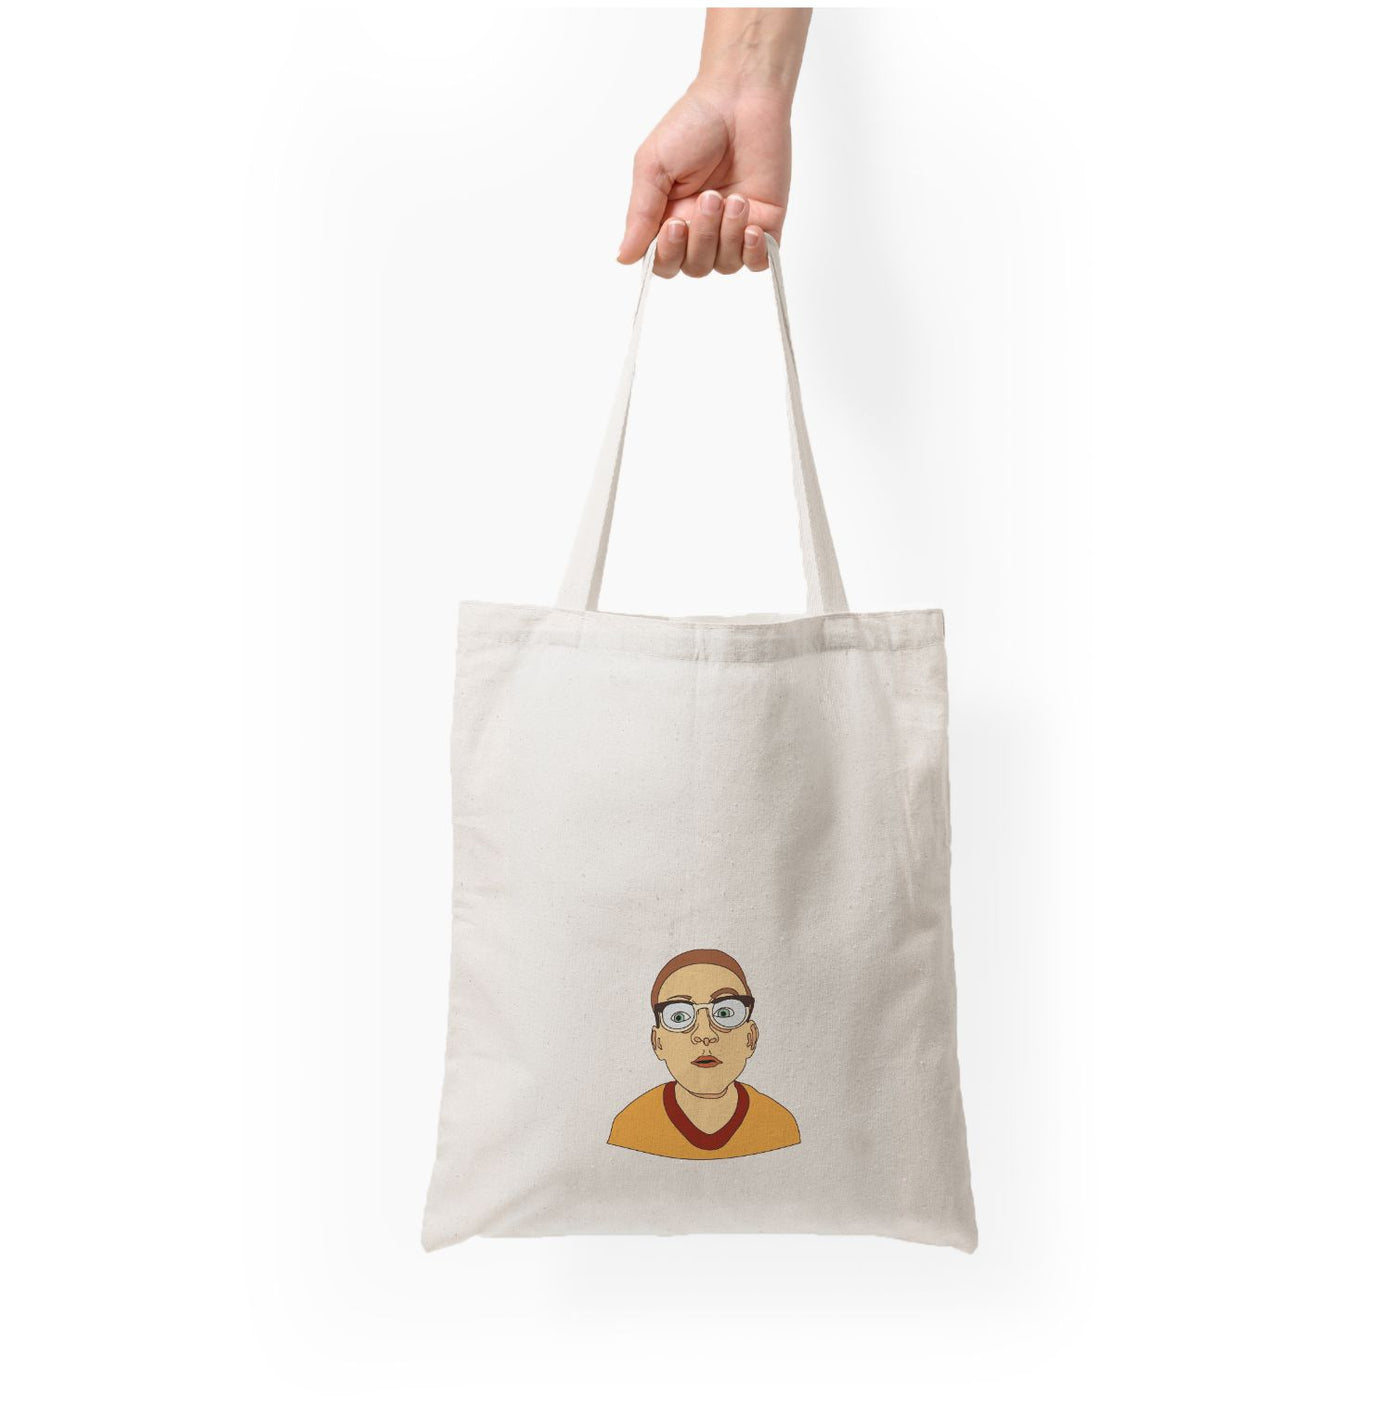 Know-It-All - Polar Express Tote Bag